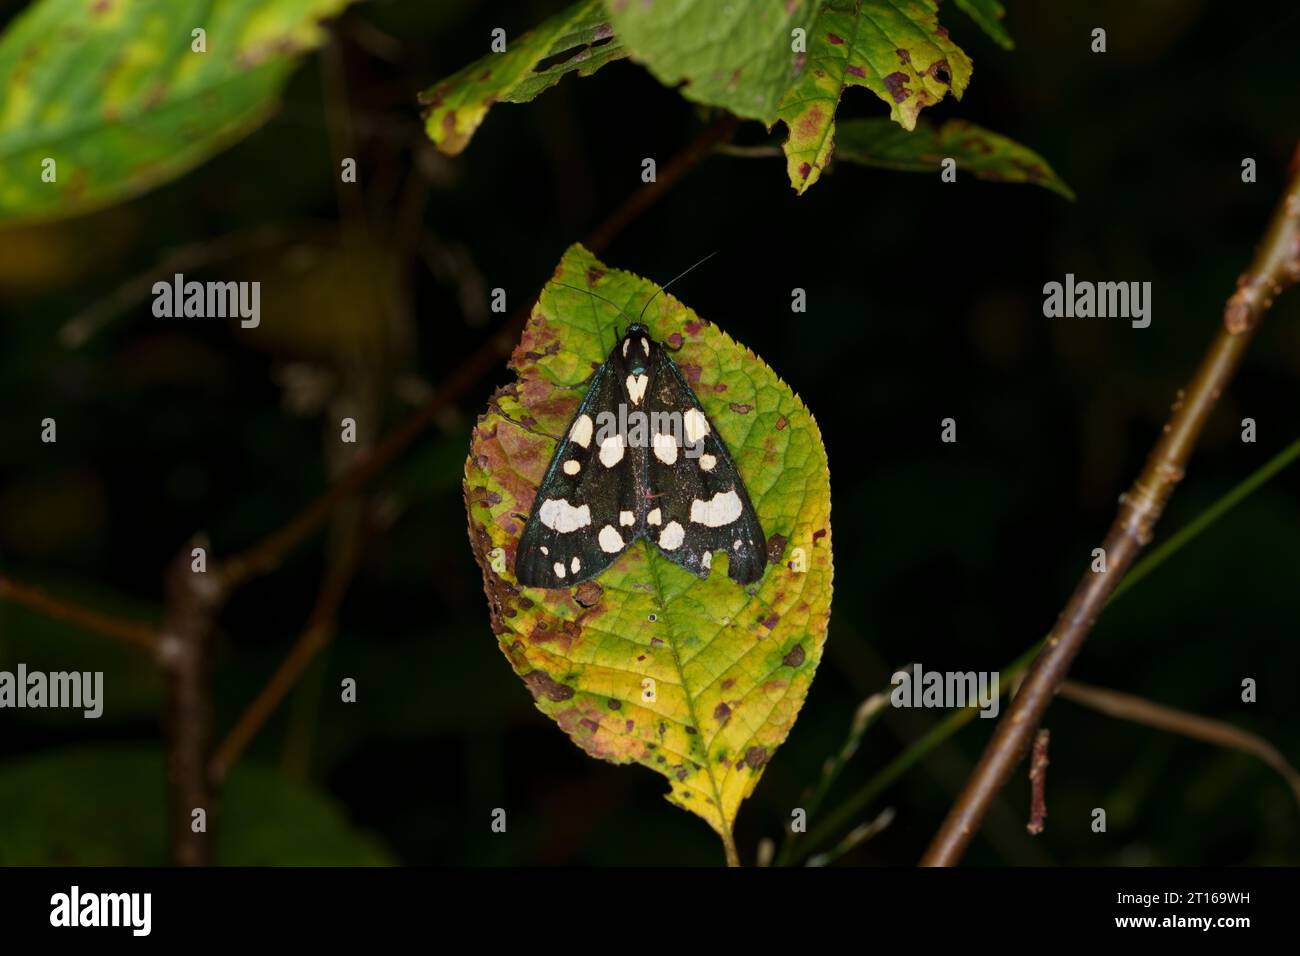 Callimorpha dominula Family Erebidae Genus Callimorpha Scarlet Tiger moth wild nature insect photography, picture, wallpaper Stock Photo